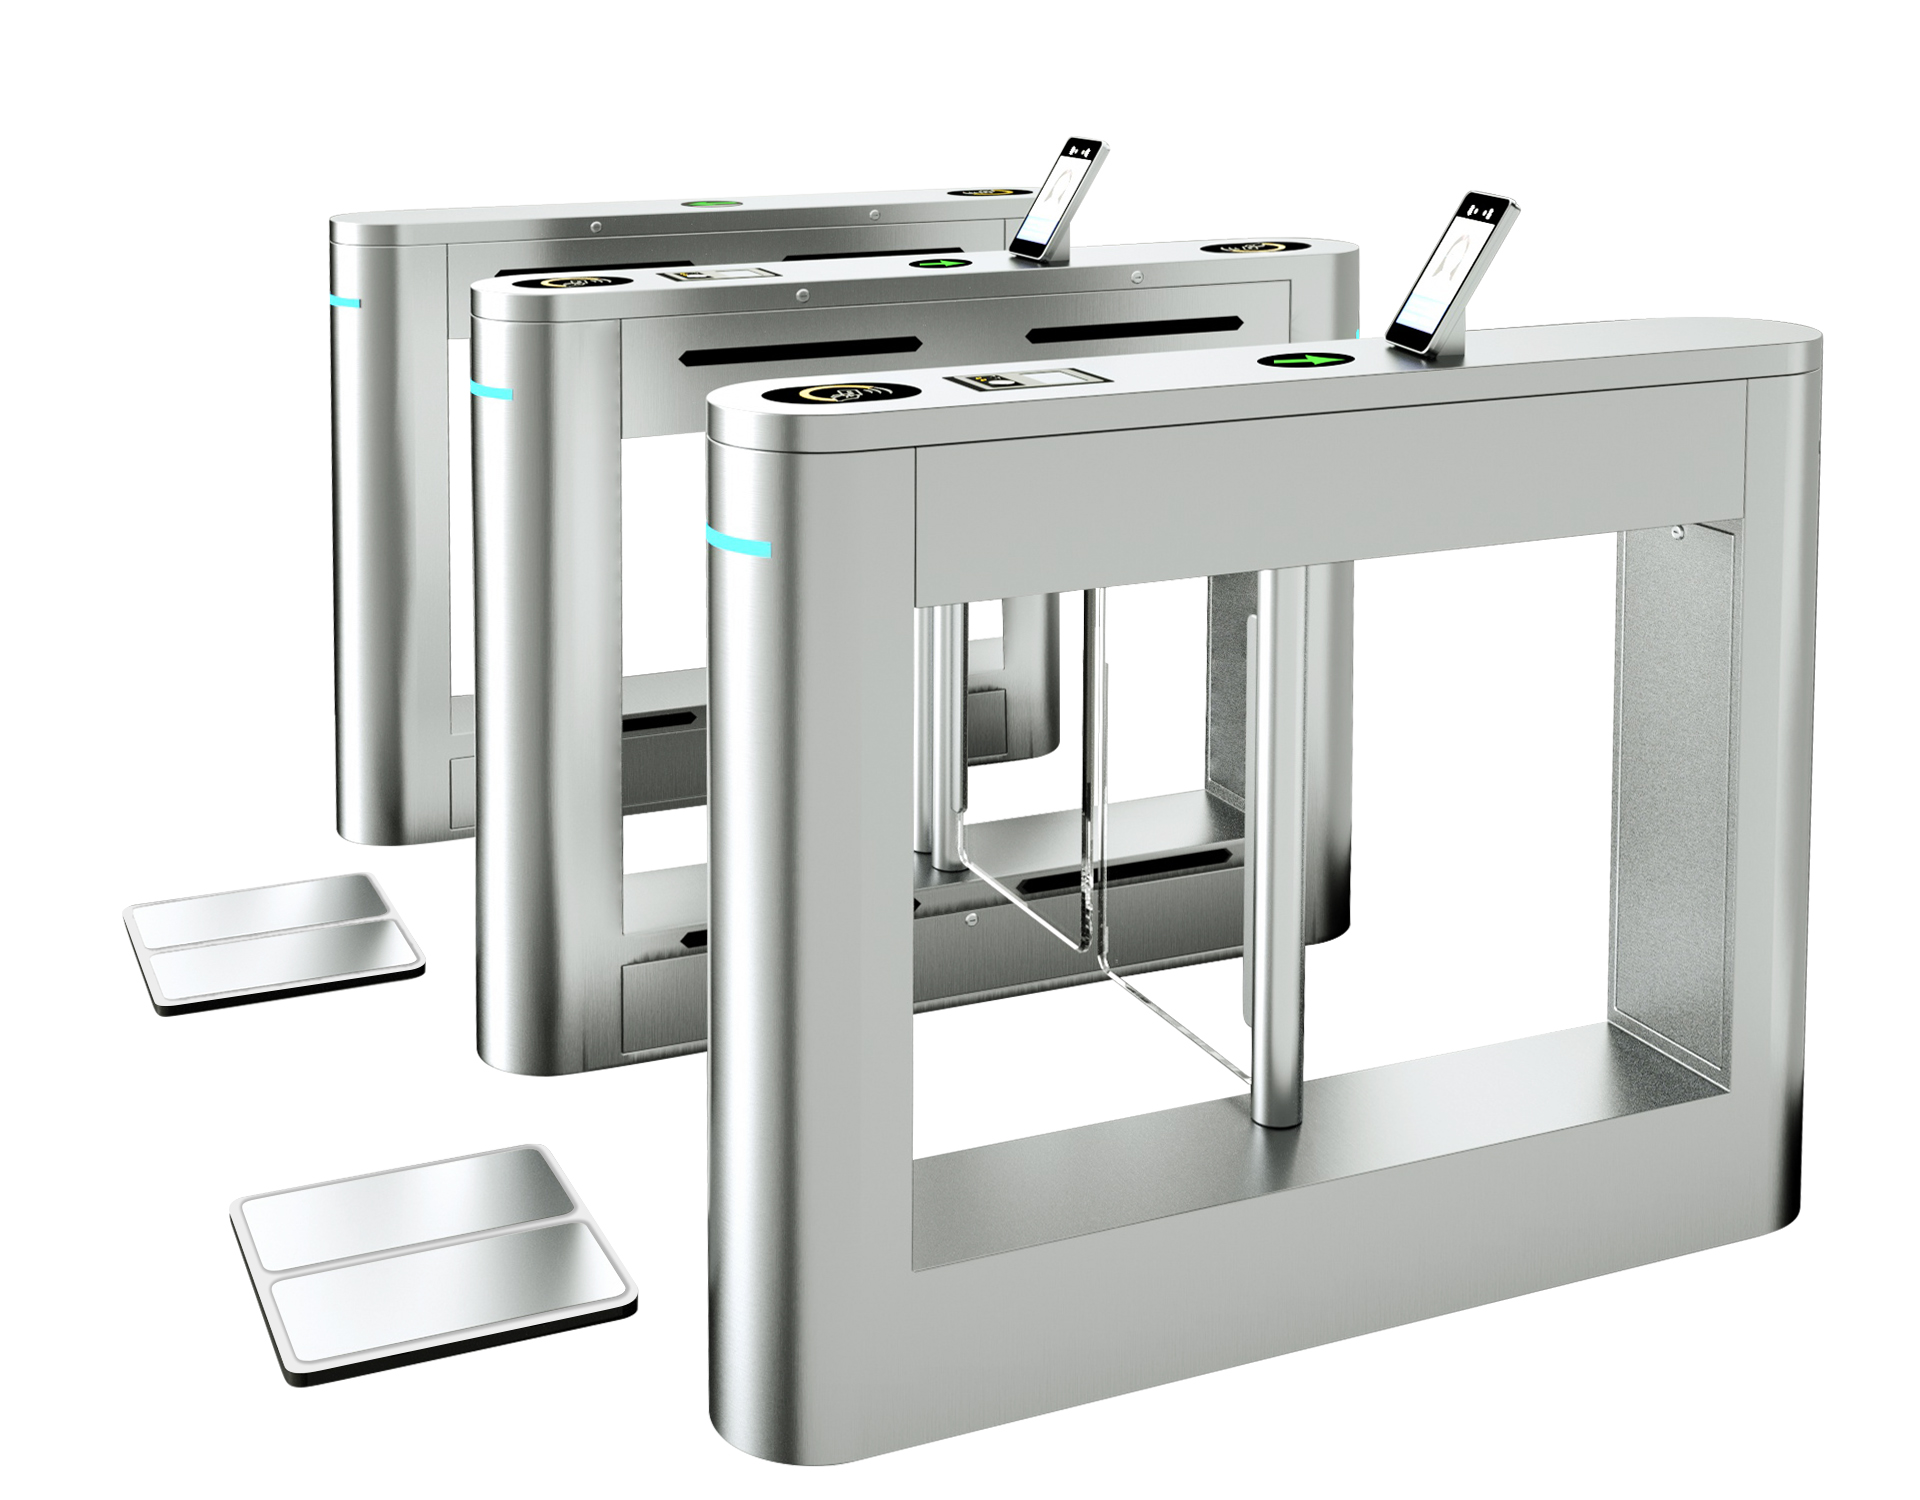 What are the classifications of turnstiles? What are the functional characteristics of the turnstile?